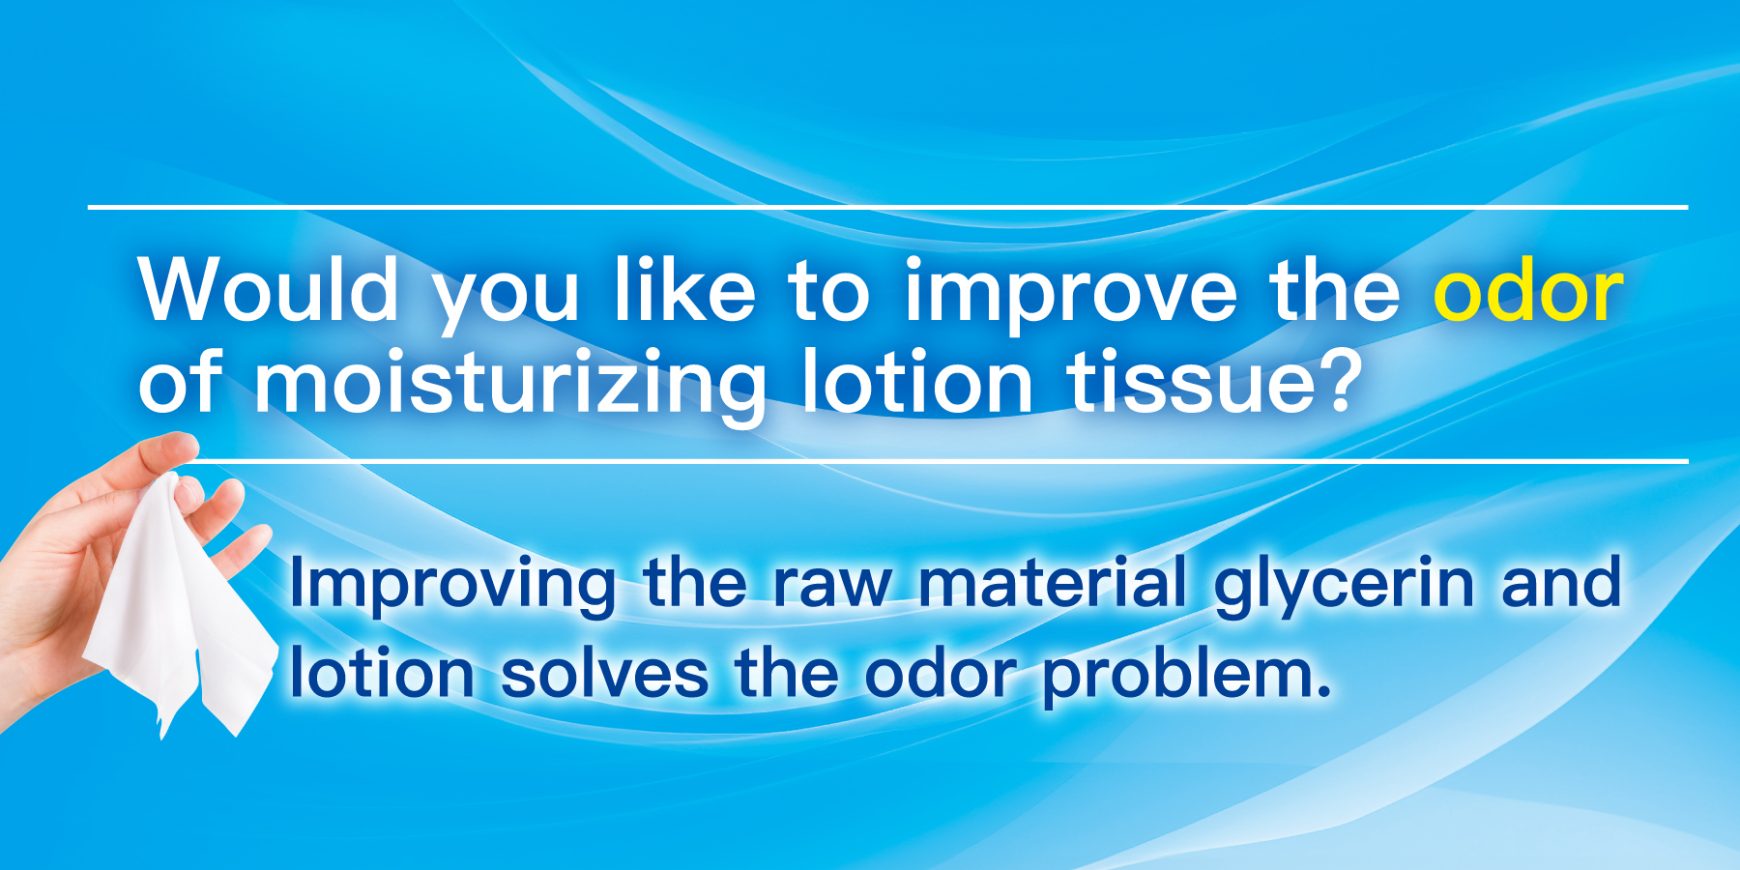 Would you like to improve the odor of　moisturizing lotion tissue?